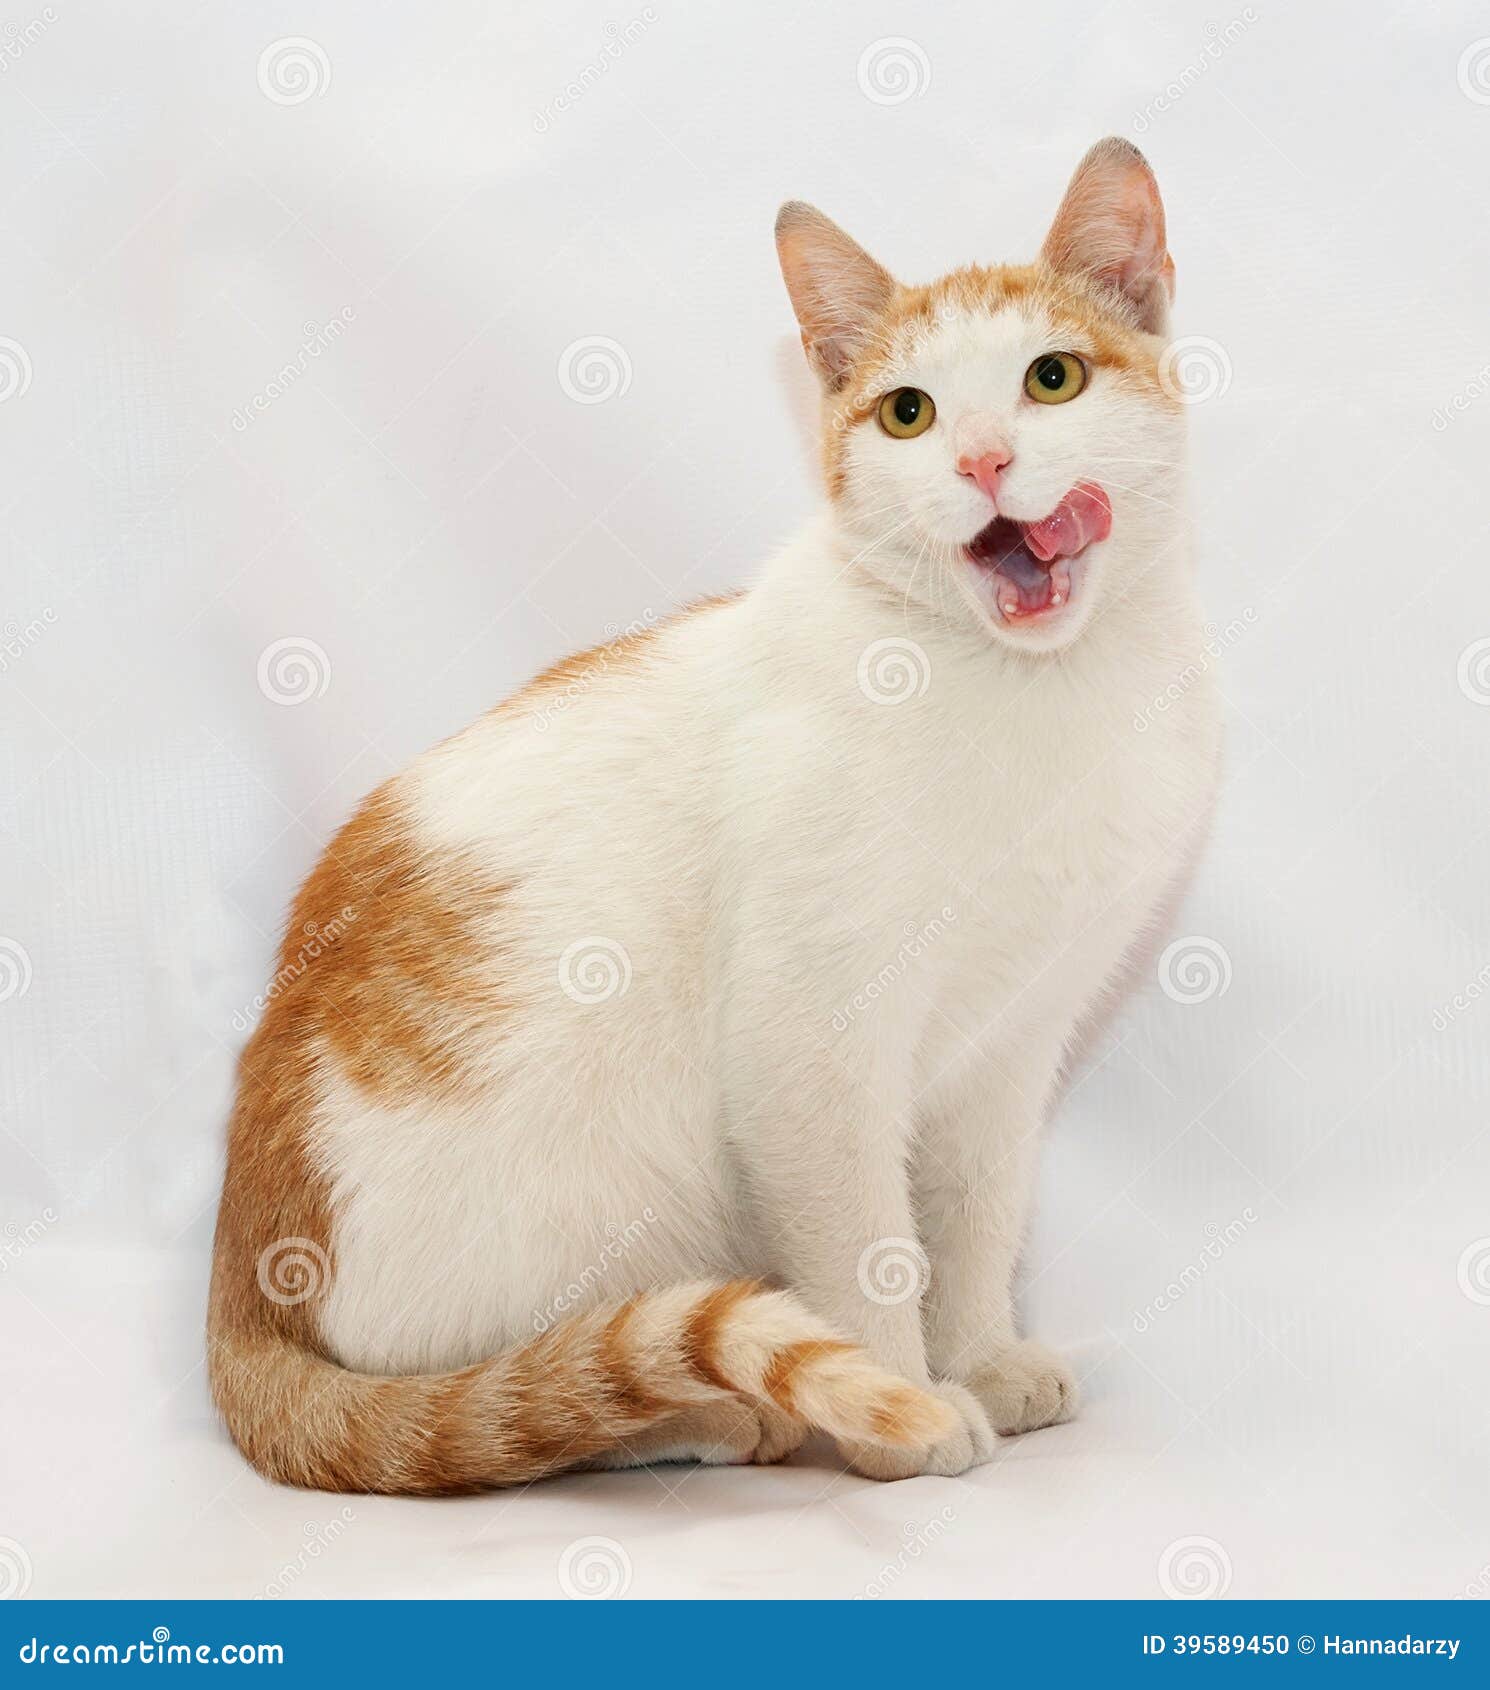 White Cat With Red Spots Sticking Out His Tongue Stock Photo - Image 